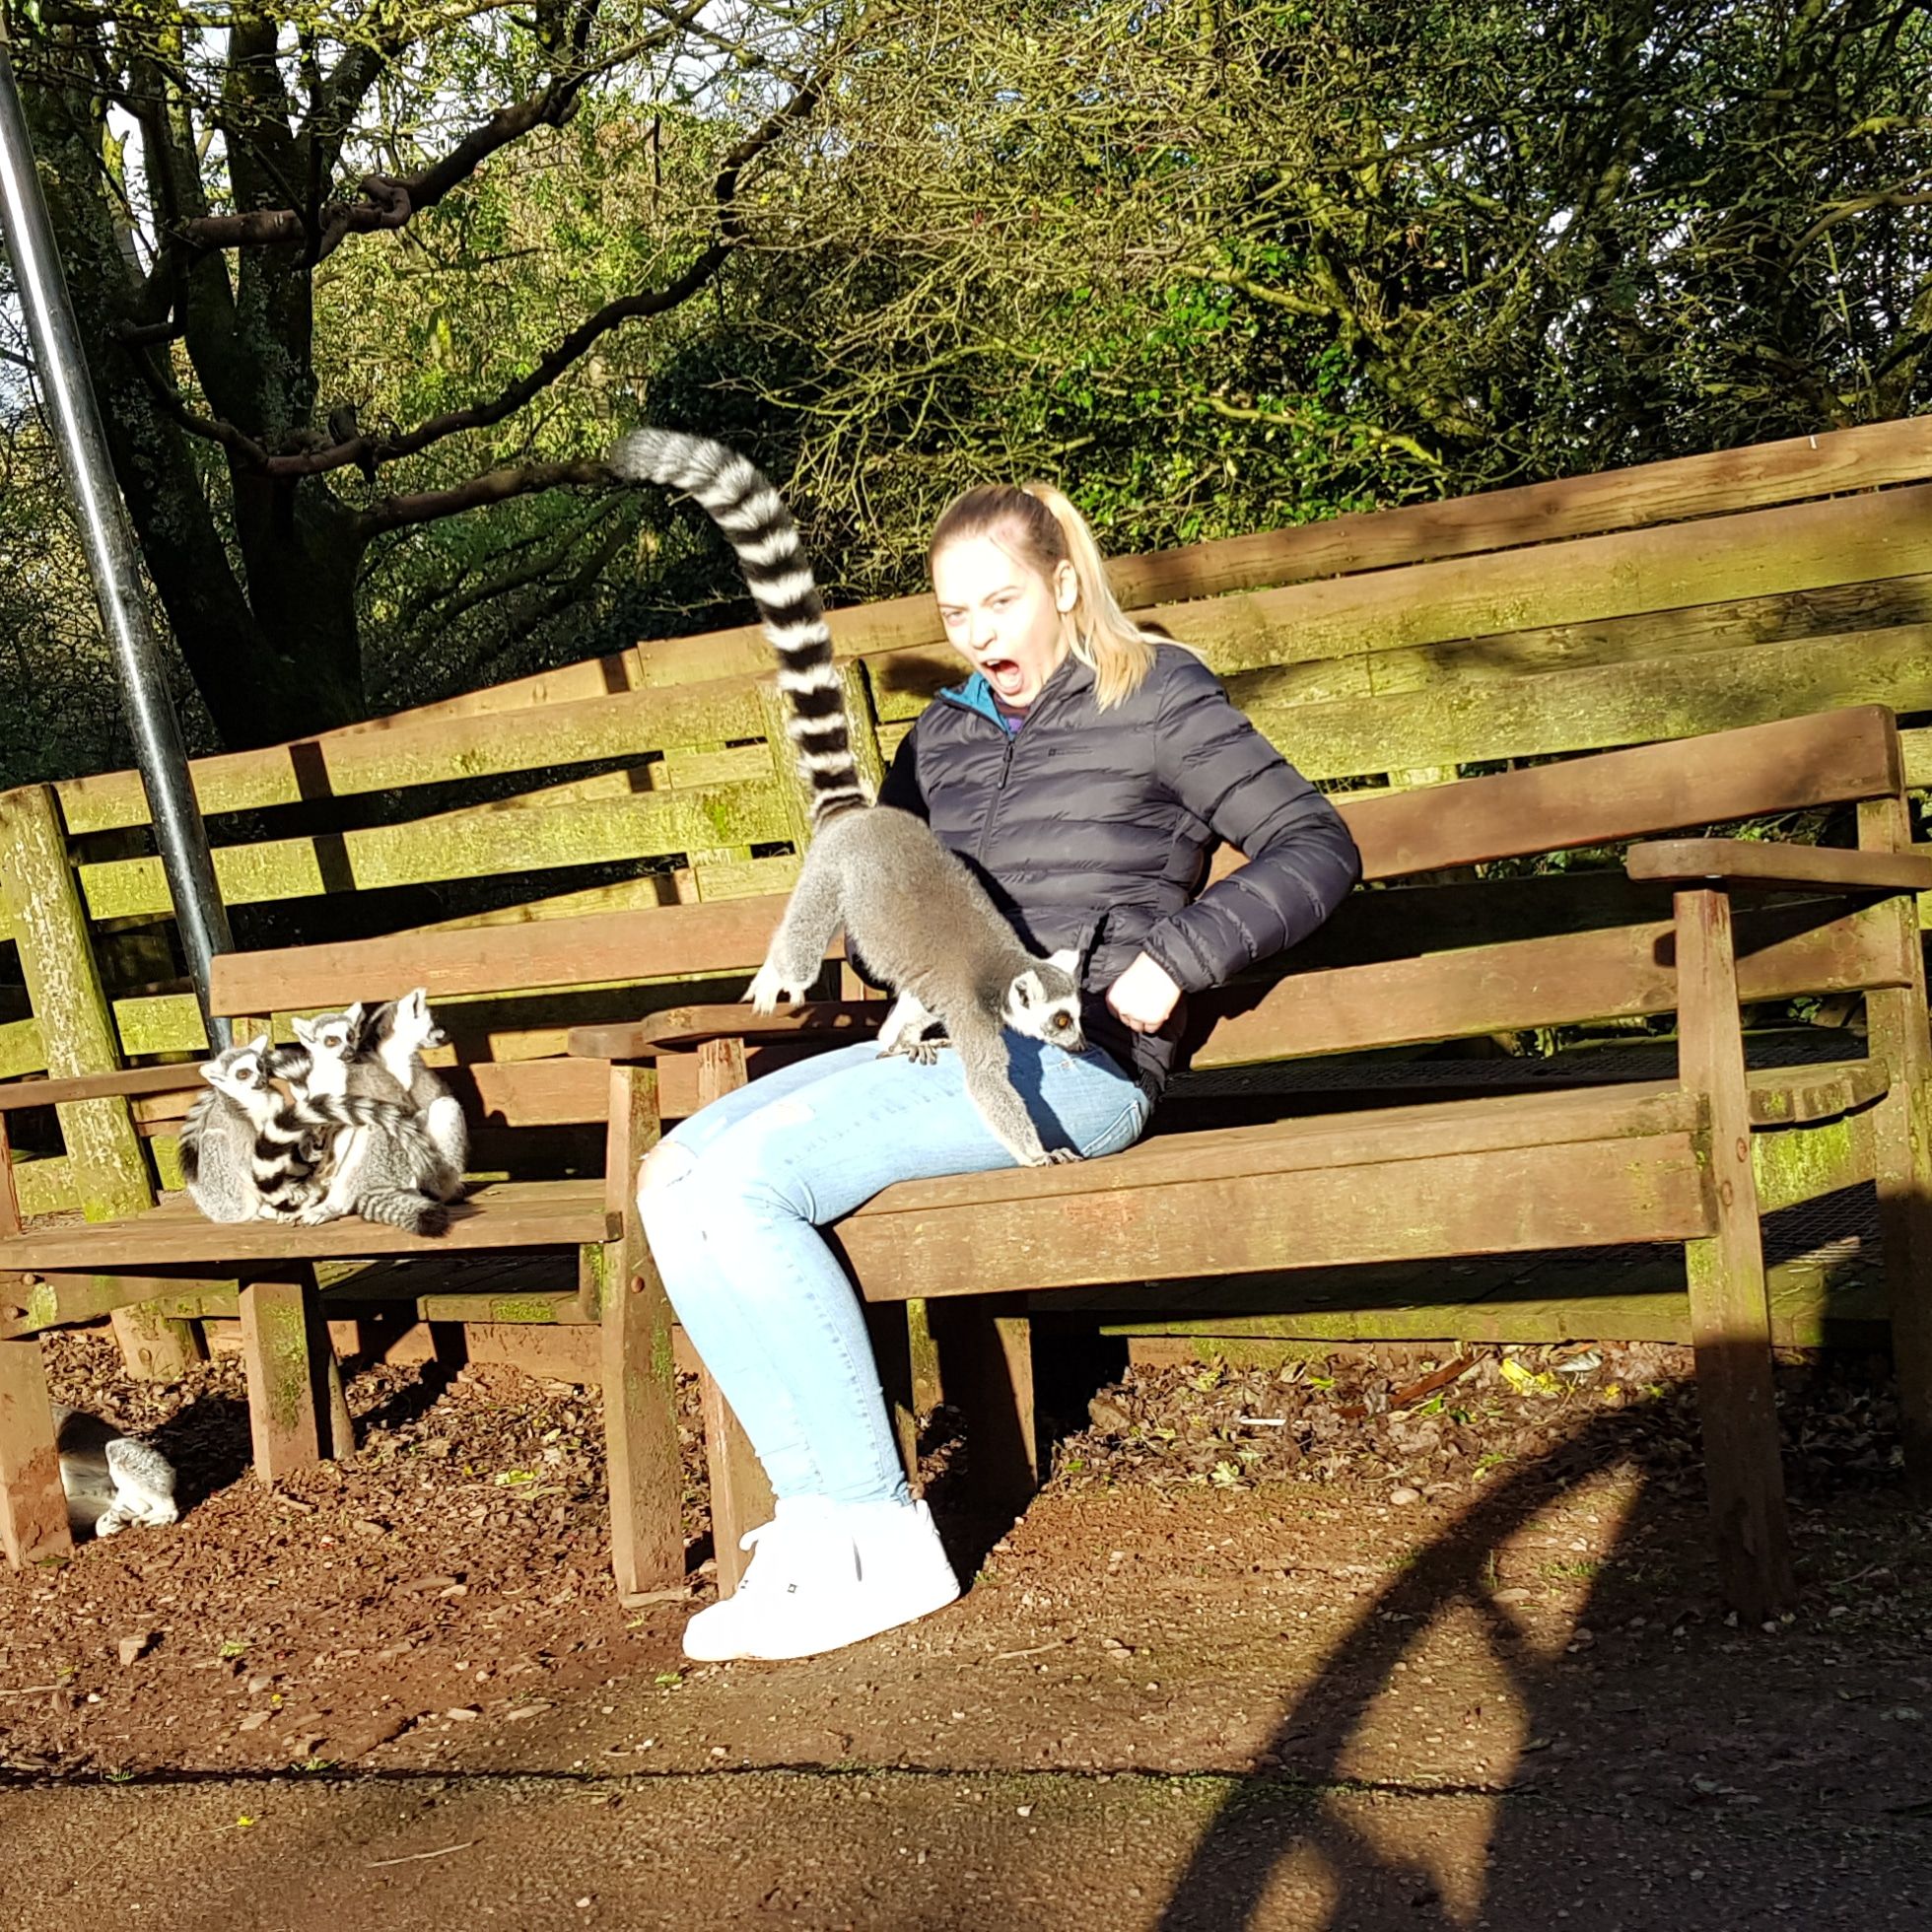 Believe it or not this is the face of pure joy on my girlfriend's face as she made friends with a lemur.